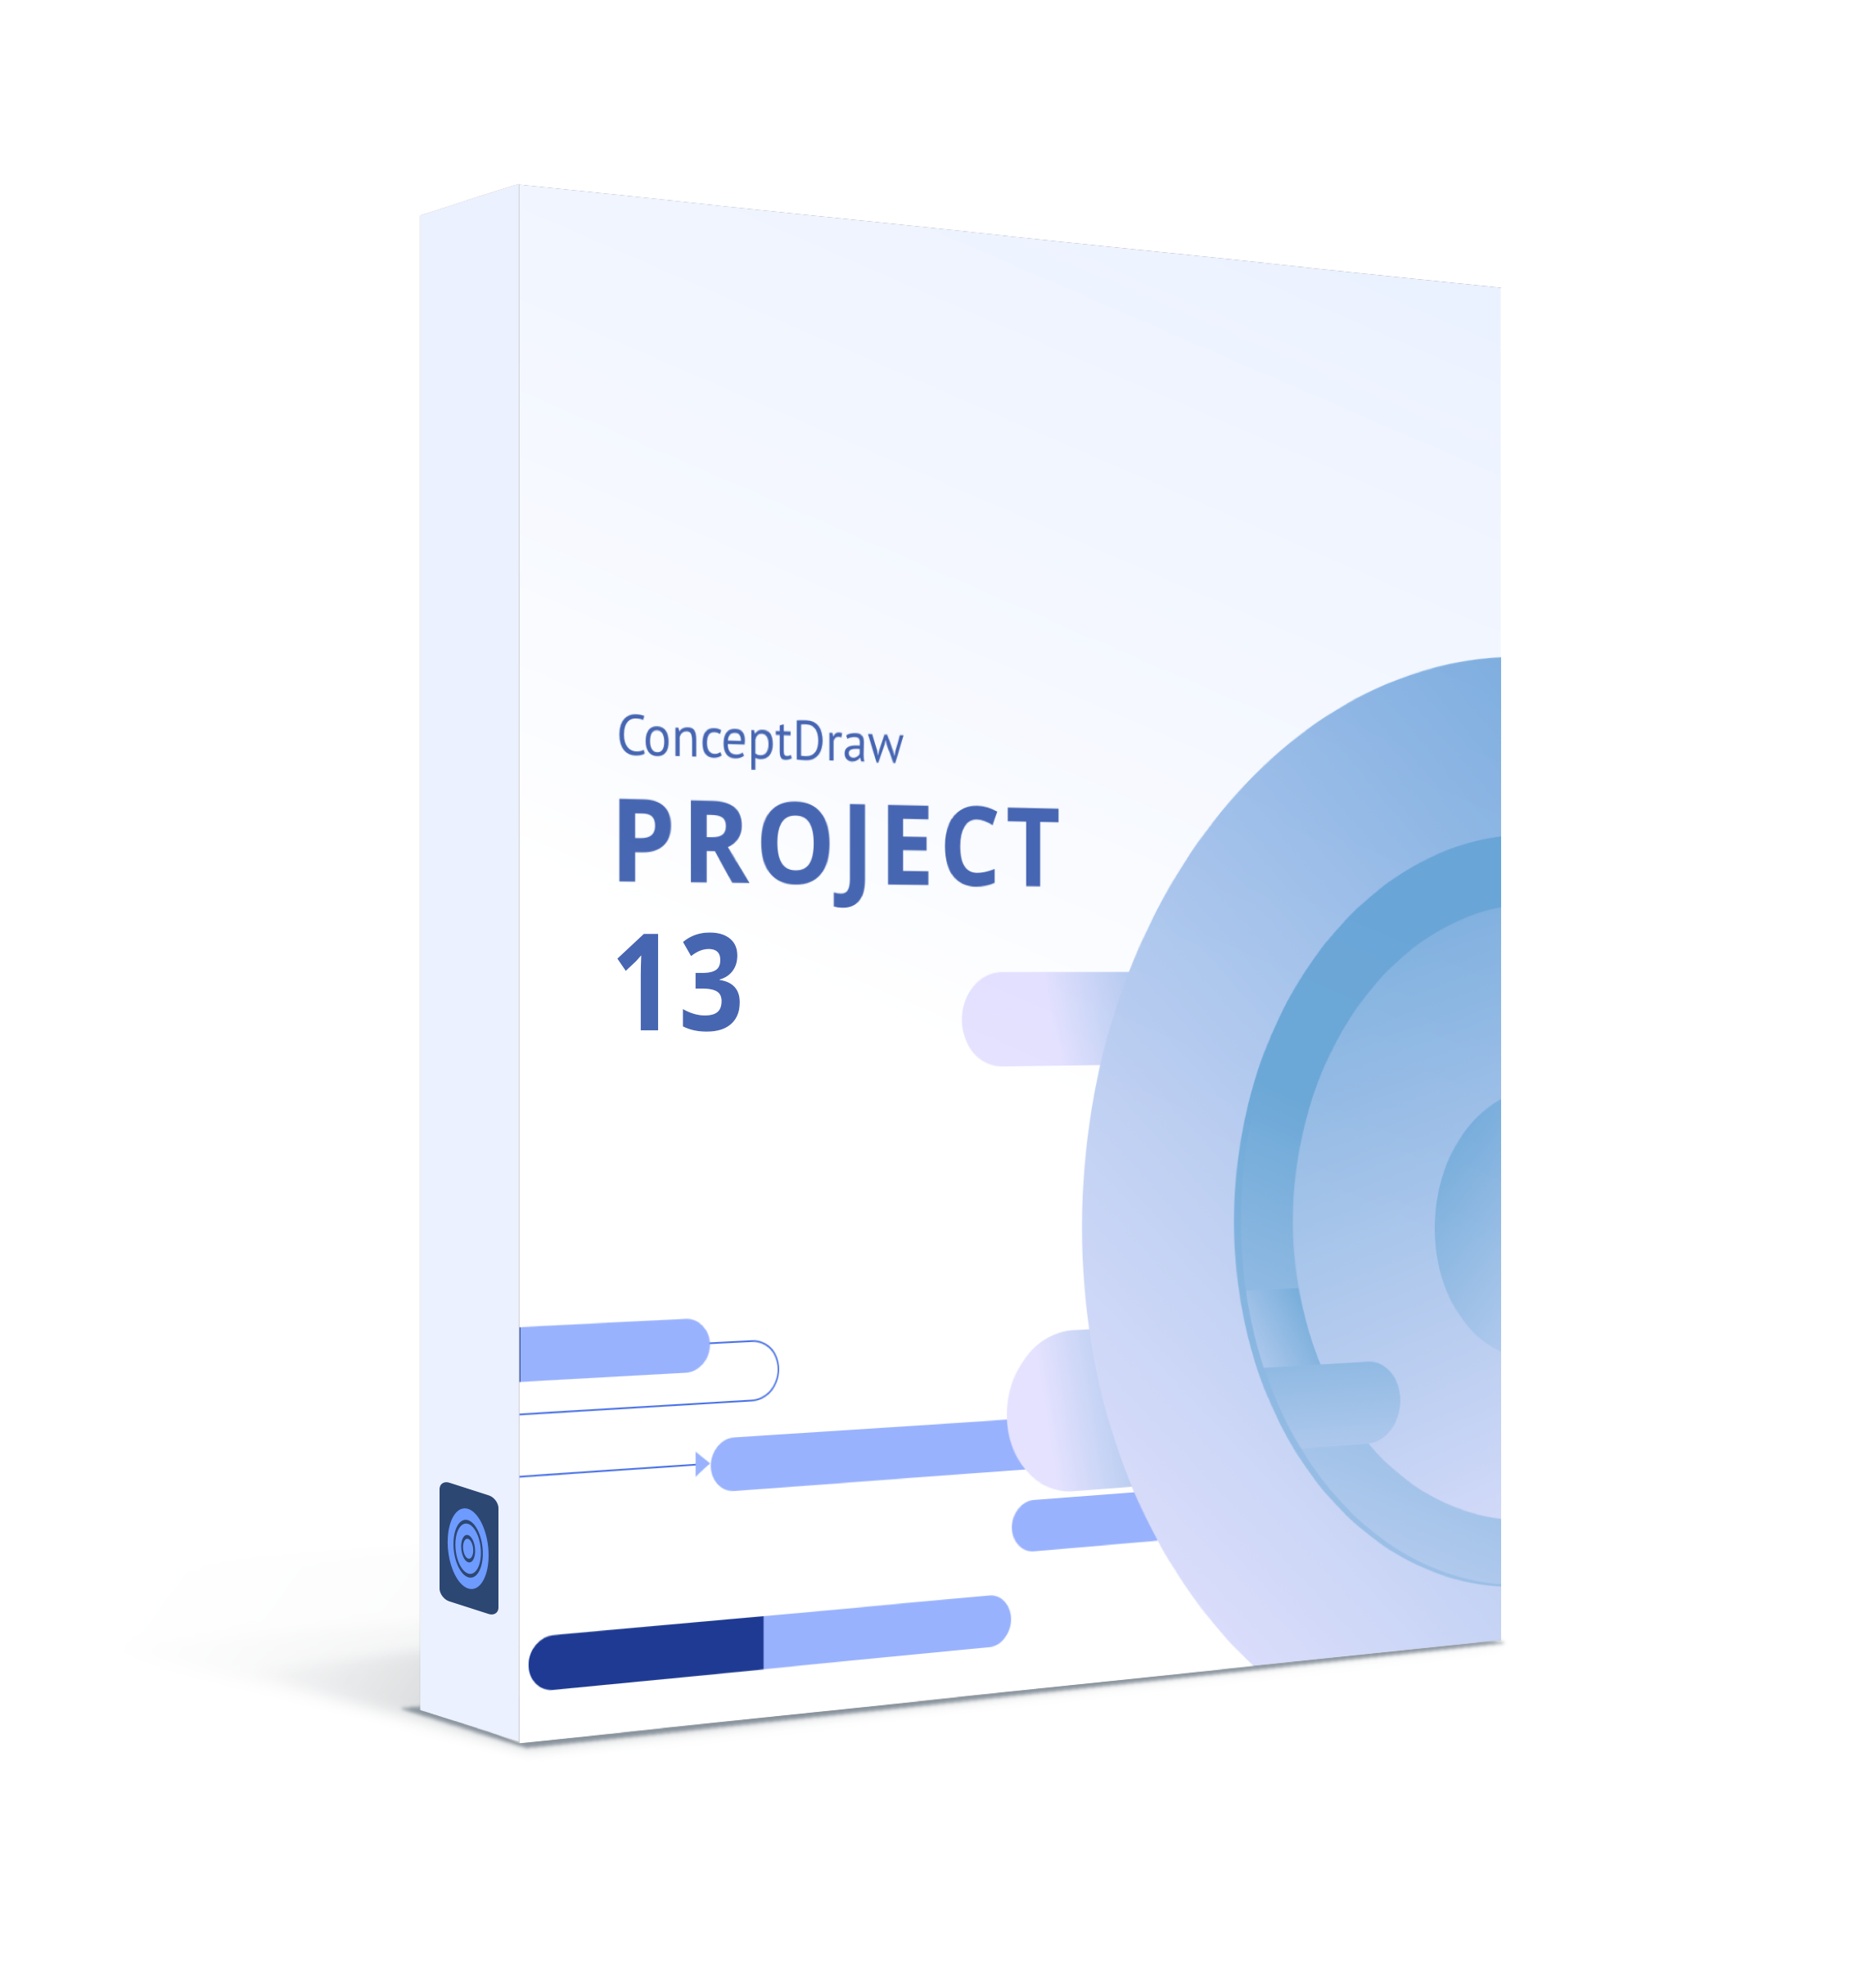 ConceptDraw PROJECT box image